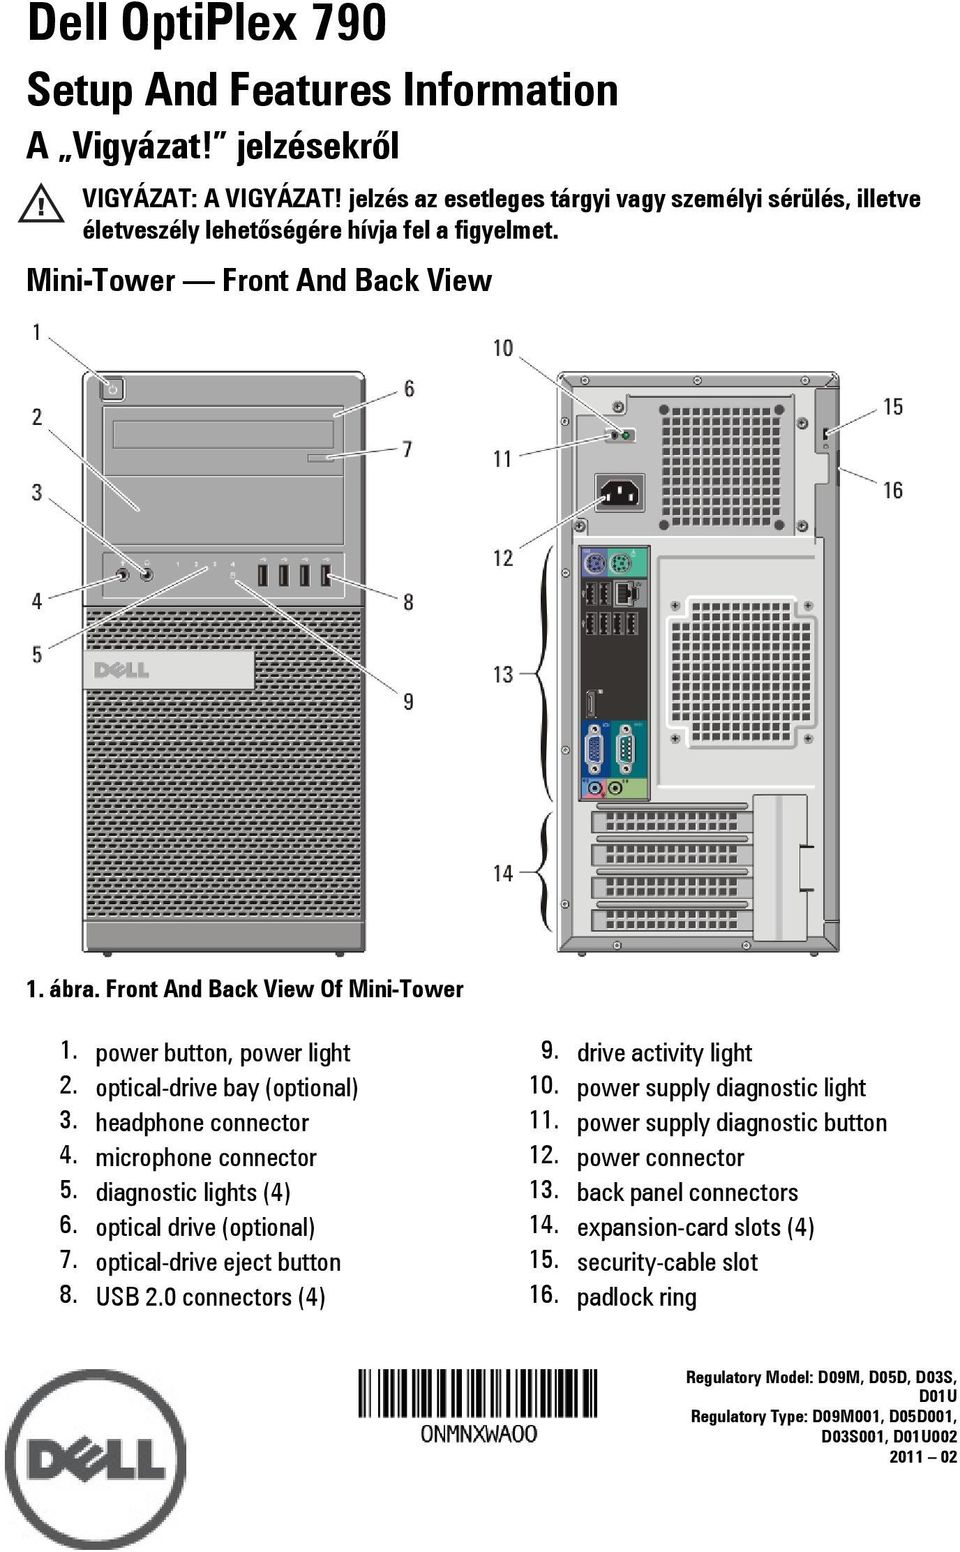 optical-drive bay (optional) 3. headphone connector 4. microphone connector 5. diagnostic lights (4) 6. optical drive (optional) 7. optical-drive eject button 8. USB 2.0 connectors (4) 9.